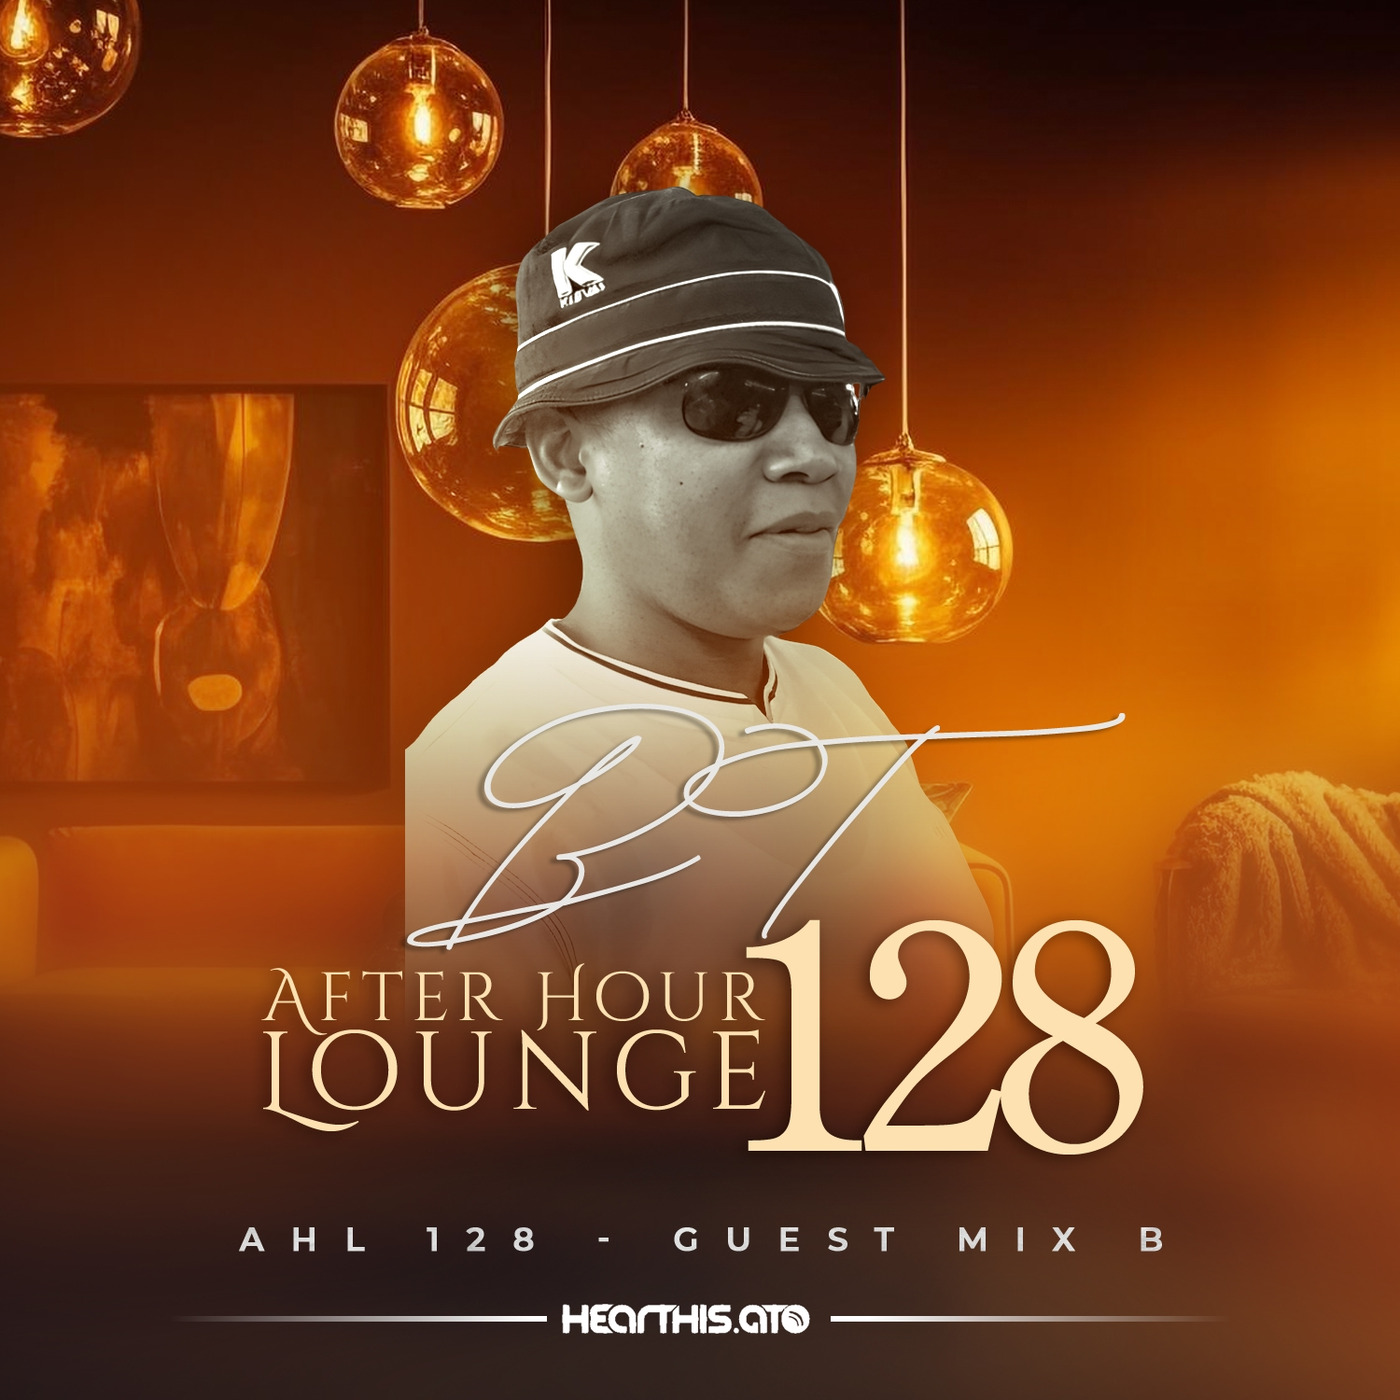 After Hour Lounge 128 (Guest Mix - B) mixed by BT